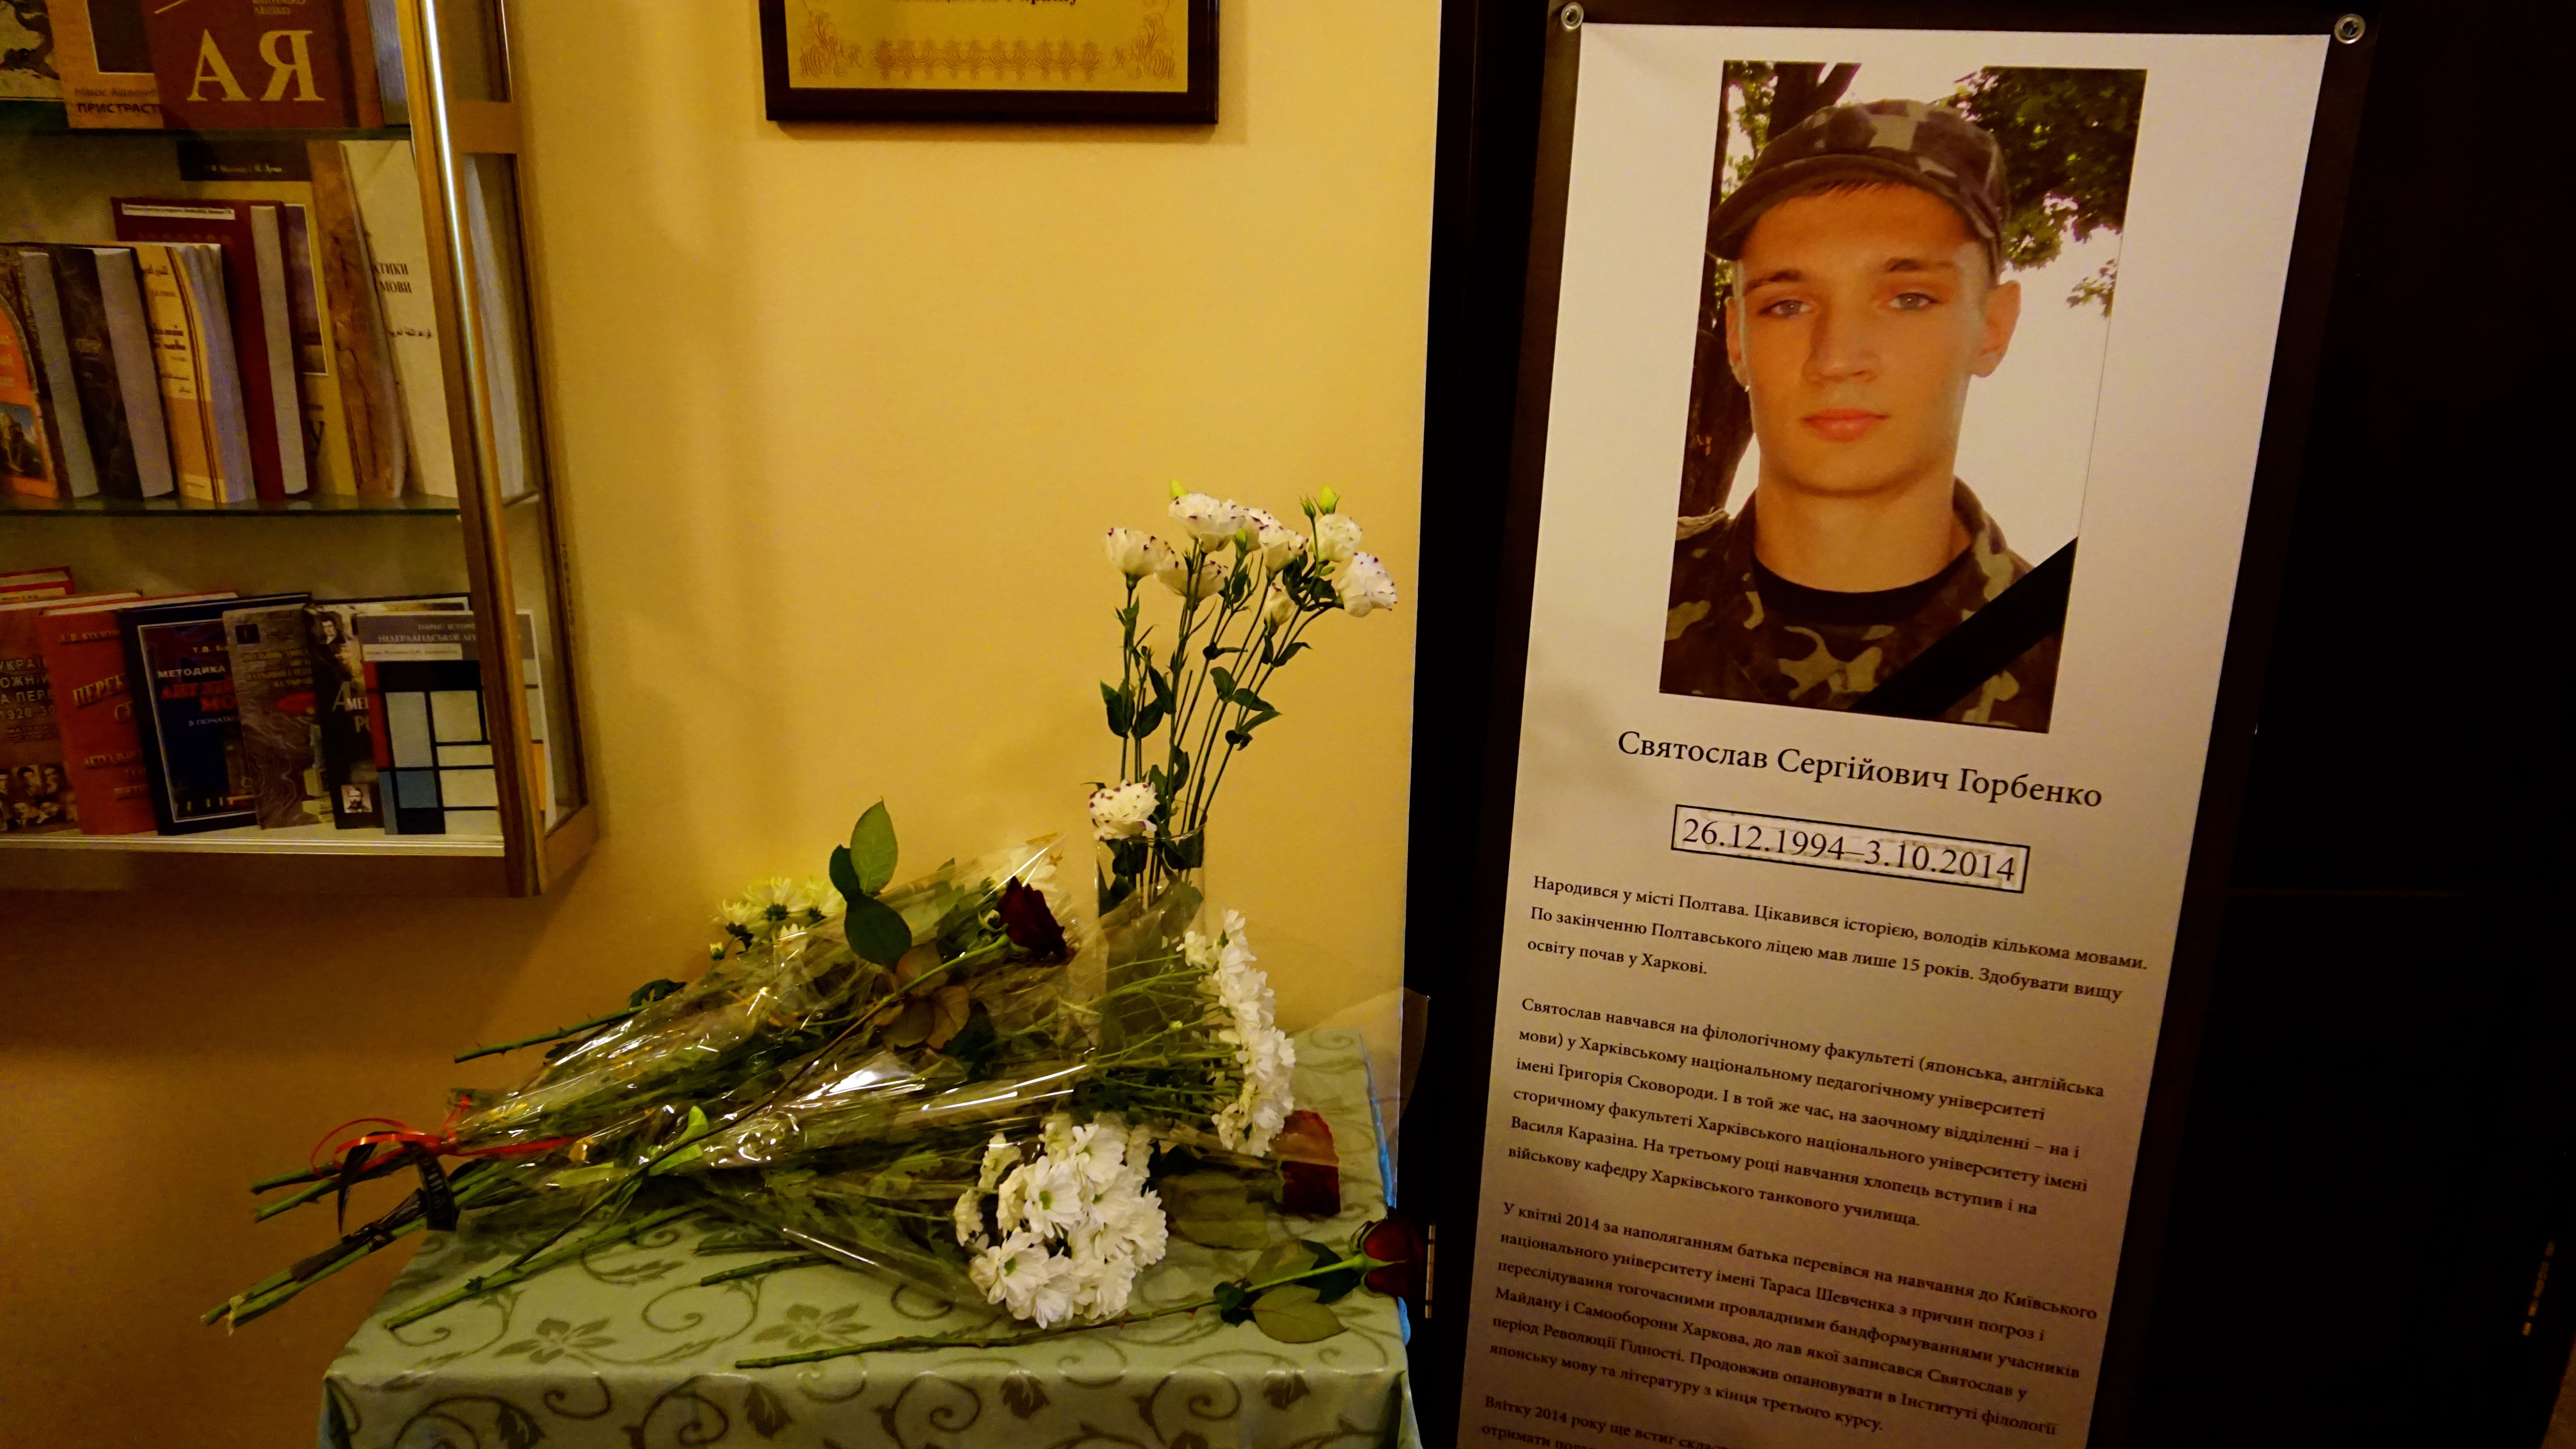 A memorial to Sviatoslav Horbenko, a 20-year-old university student who died fighting in eastern Ukraine. (Photo: Nolan Peterson/The Daily Signal)